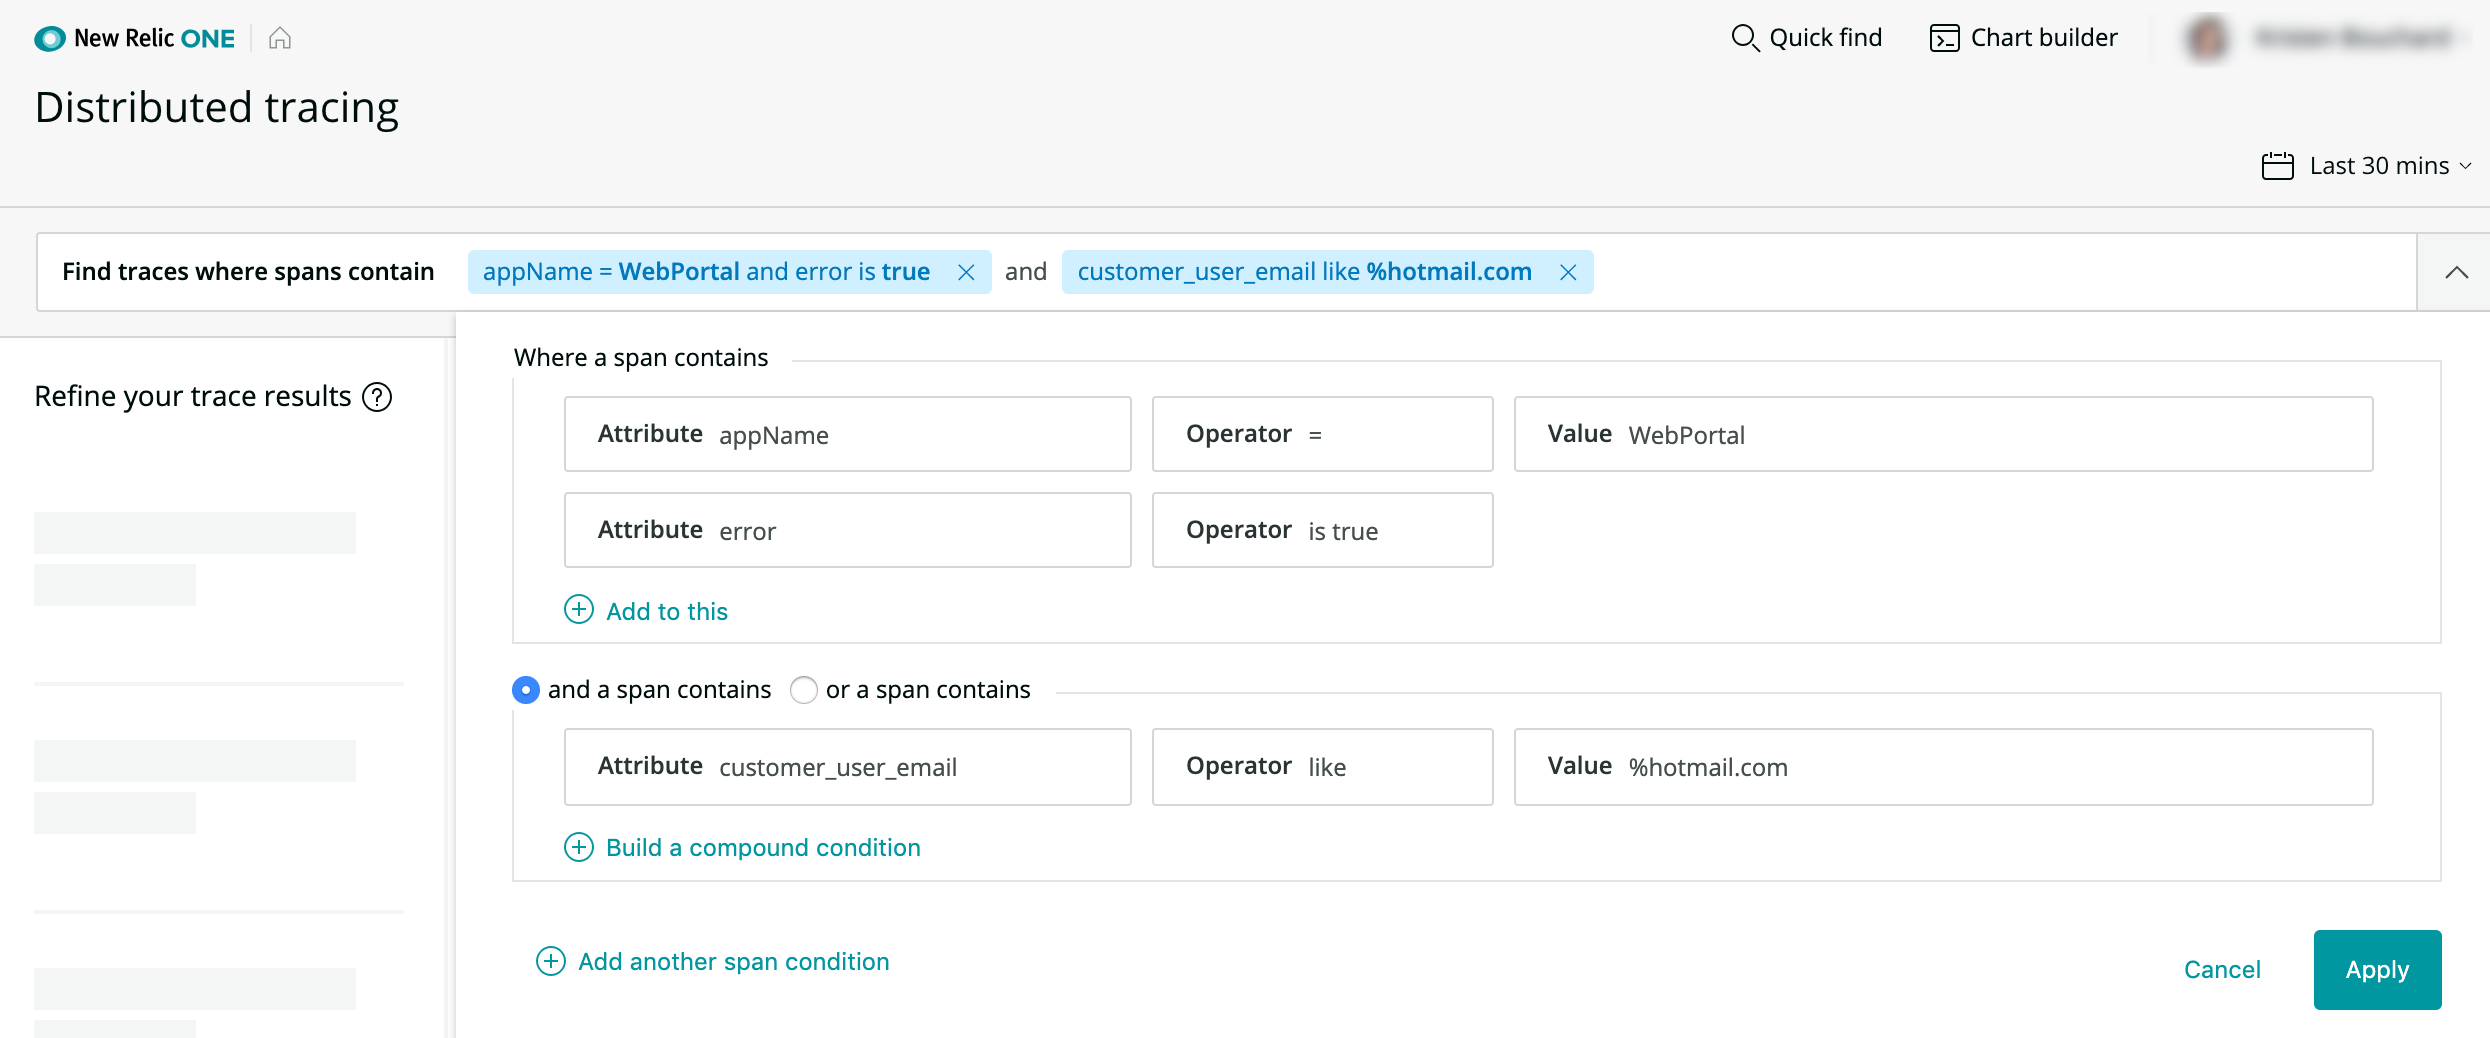 New Relic One distributed tracing - query example 2